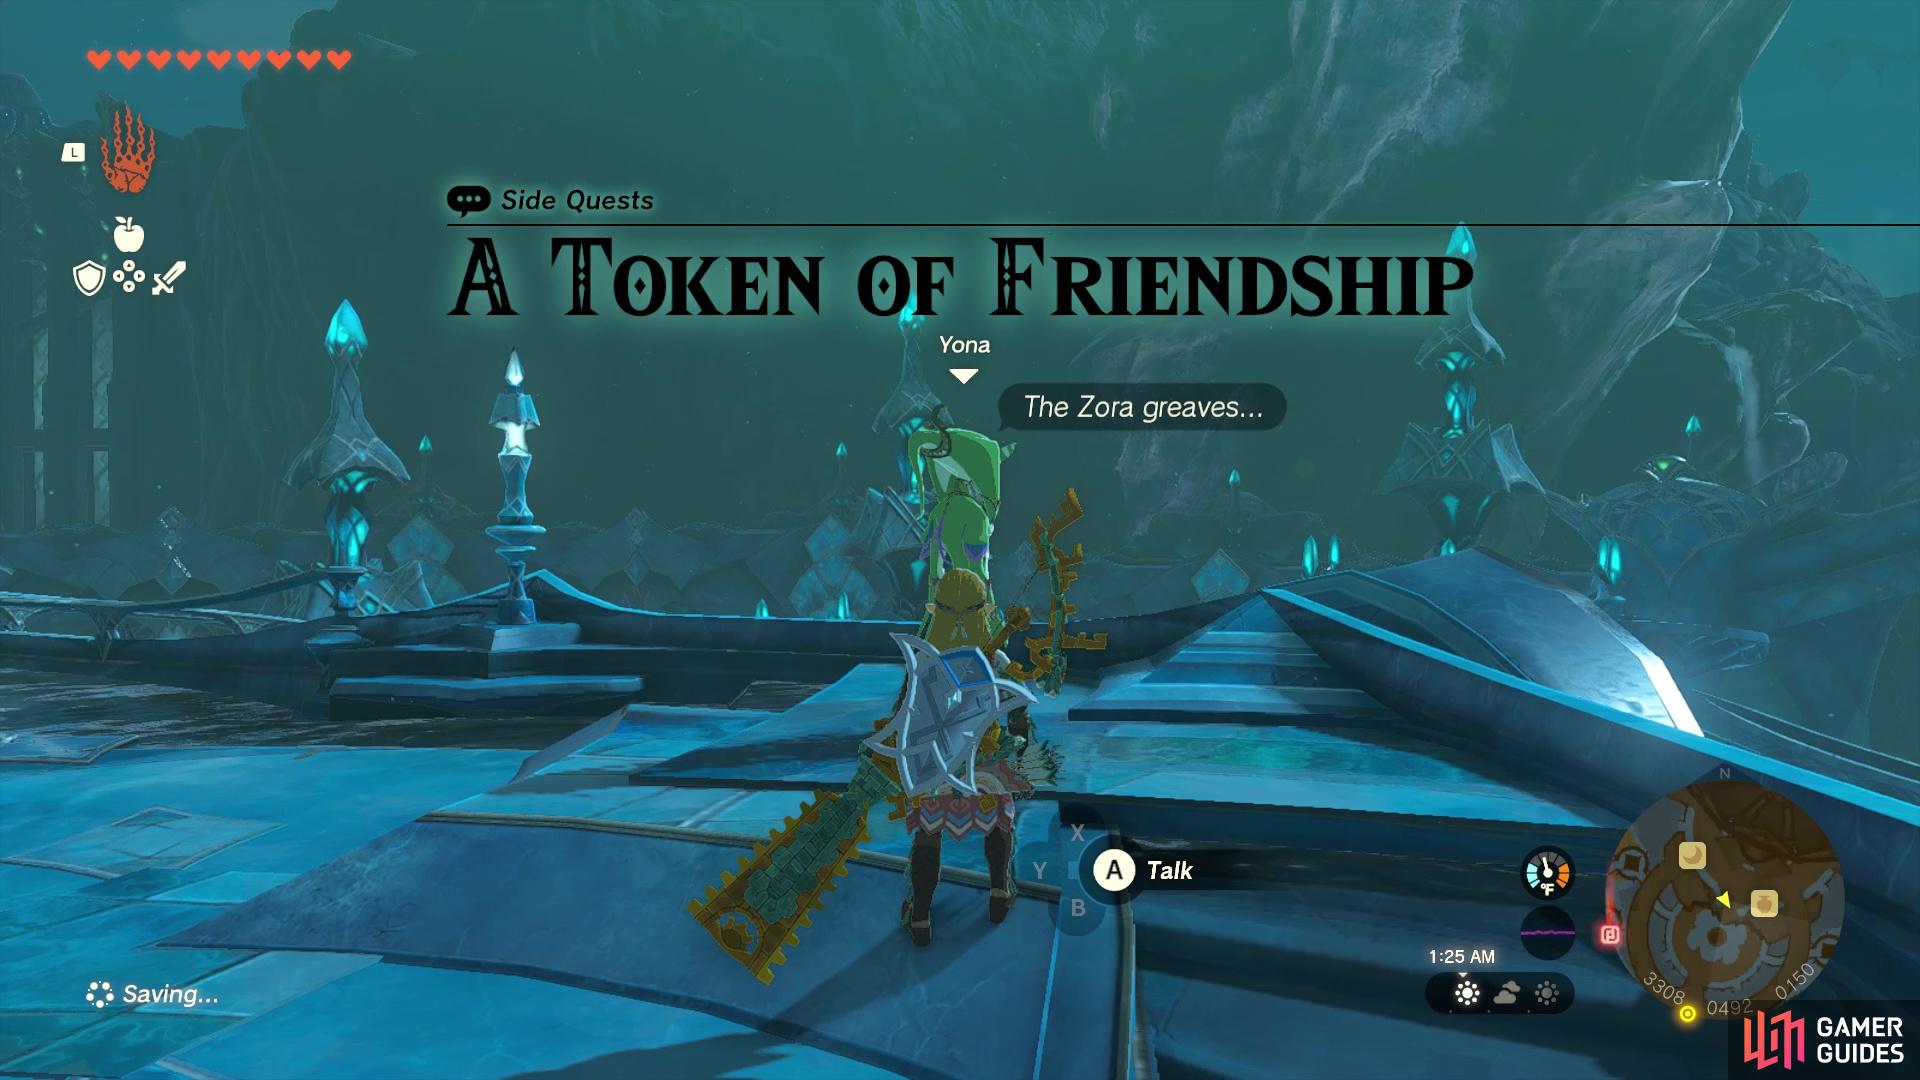 Queen Yona will have a side quest that sends you to find the Zora Greaves.